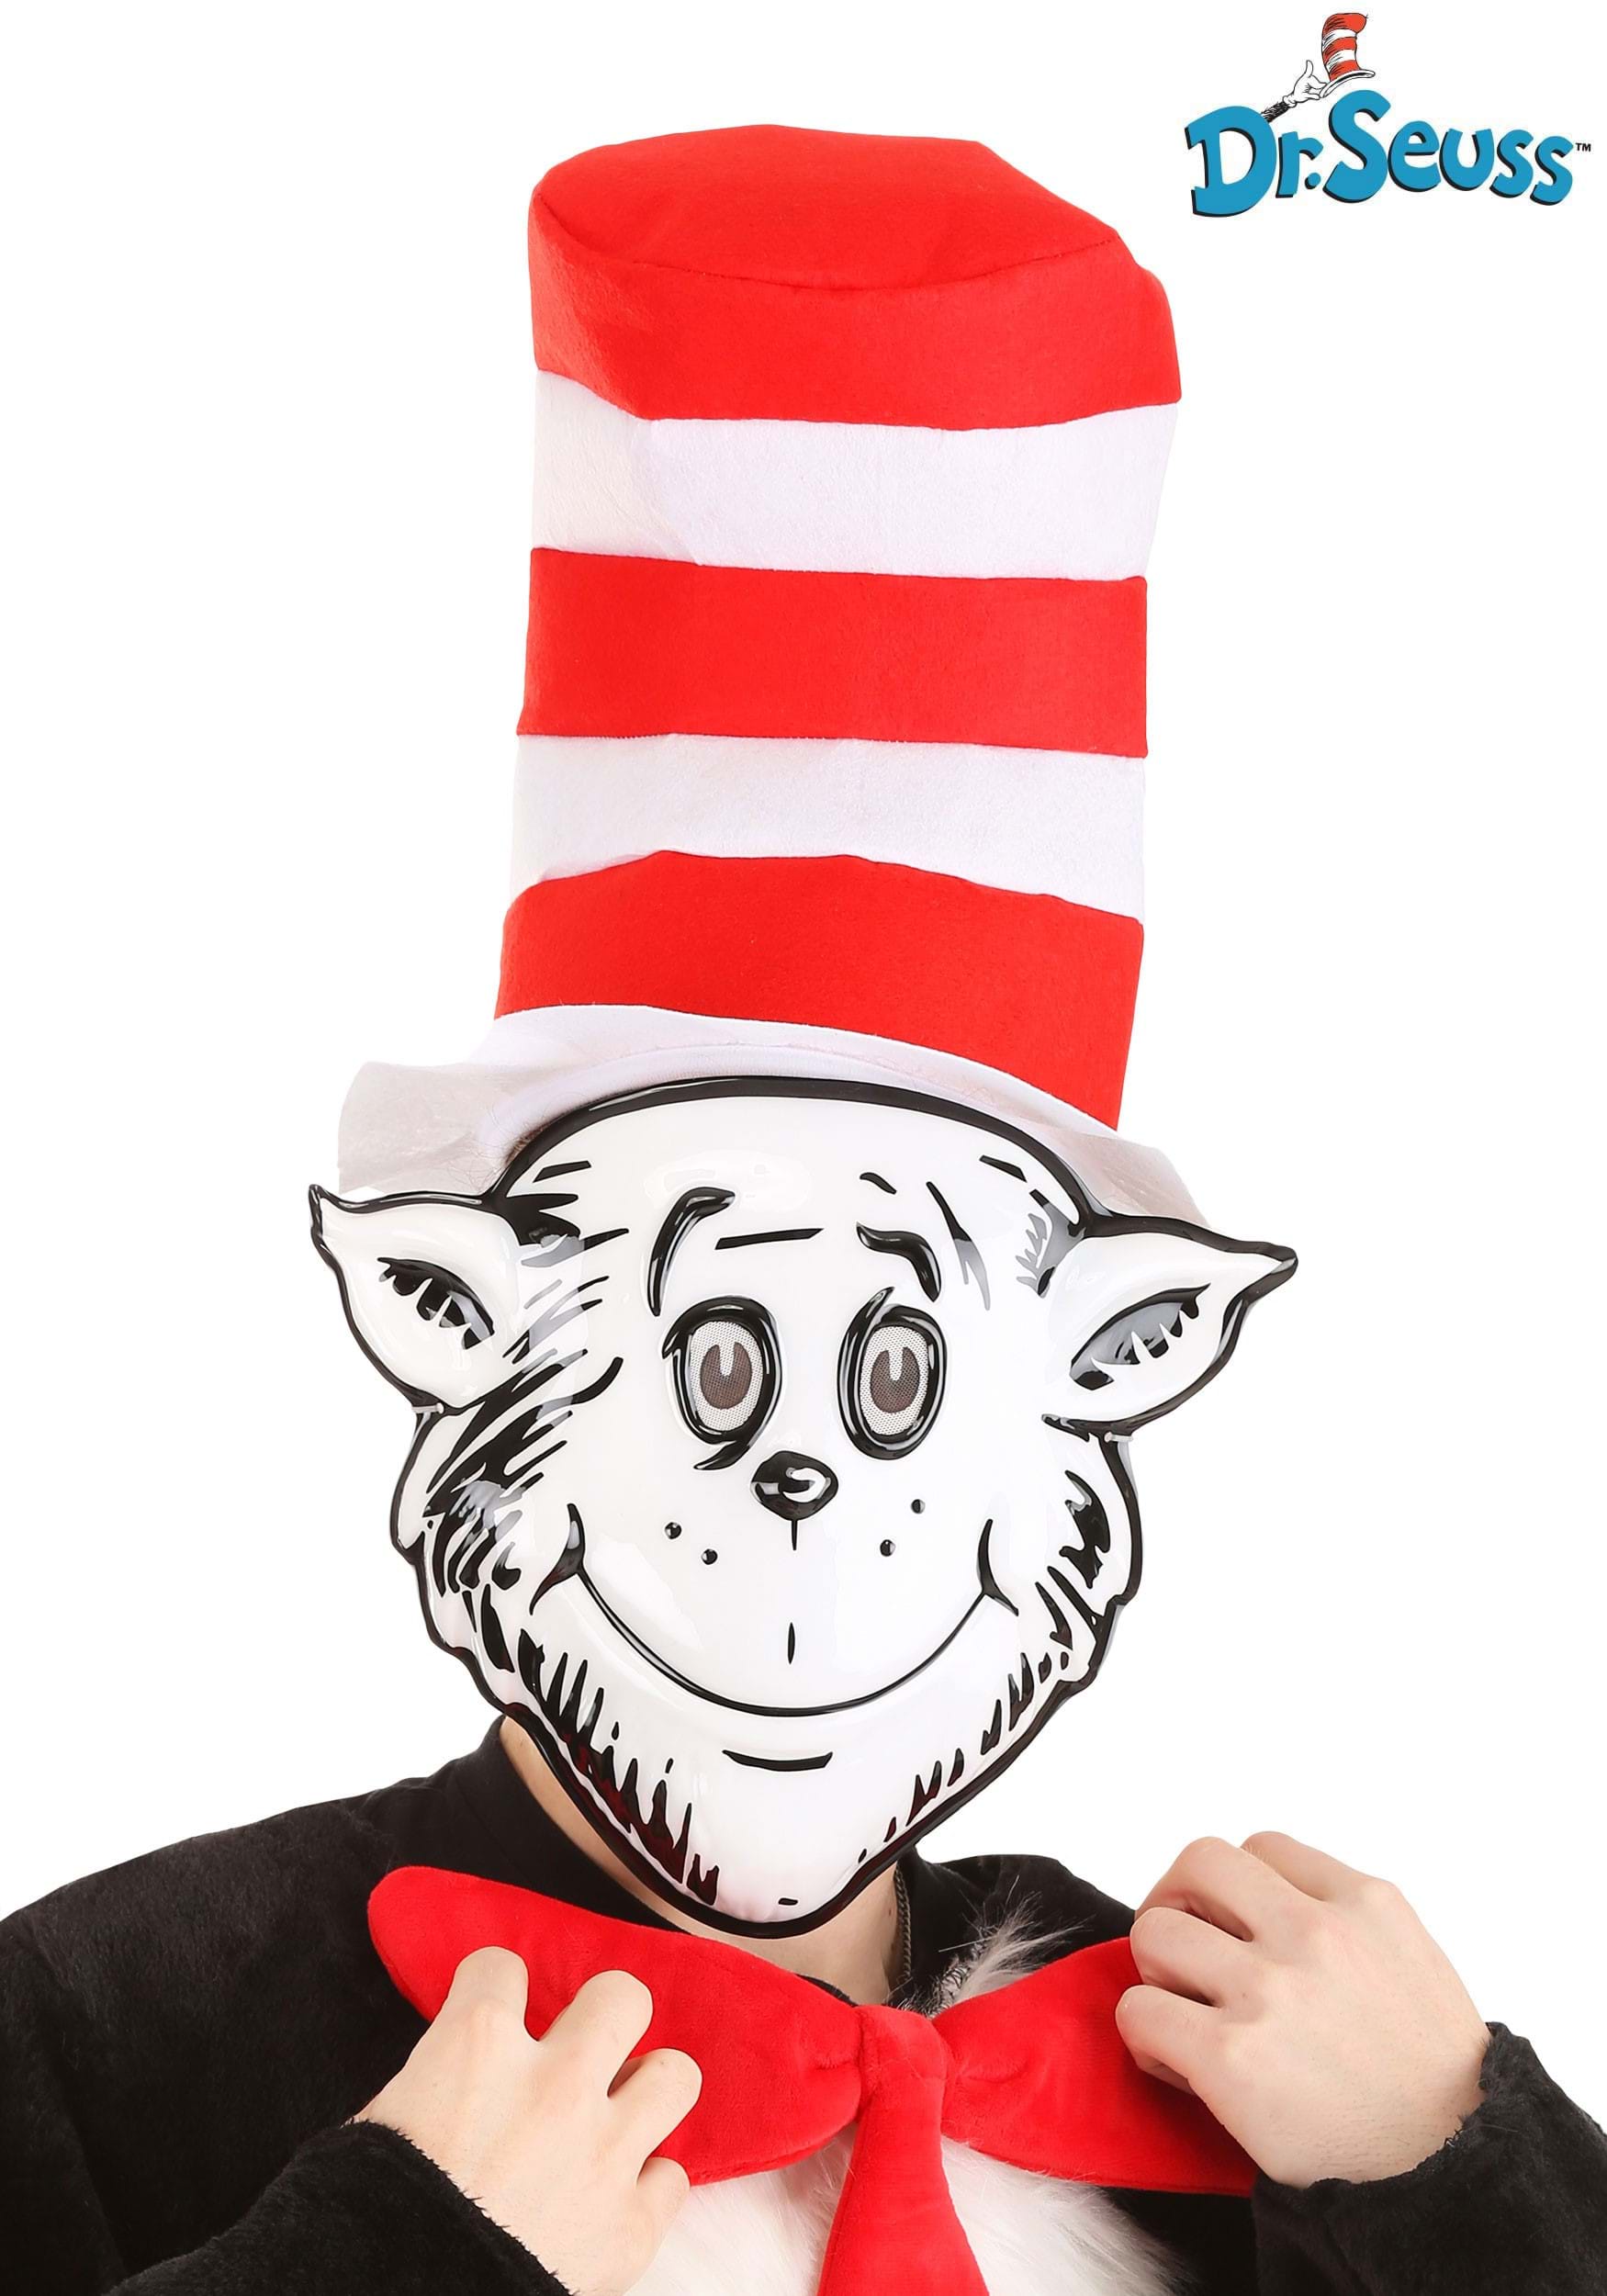 https://images.halloween.com/products/71089/1-1/the-cat-in-the-hat-vacuform-mask-and-hat-kit.jpg